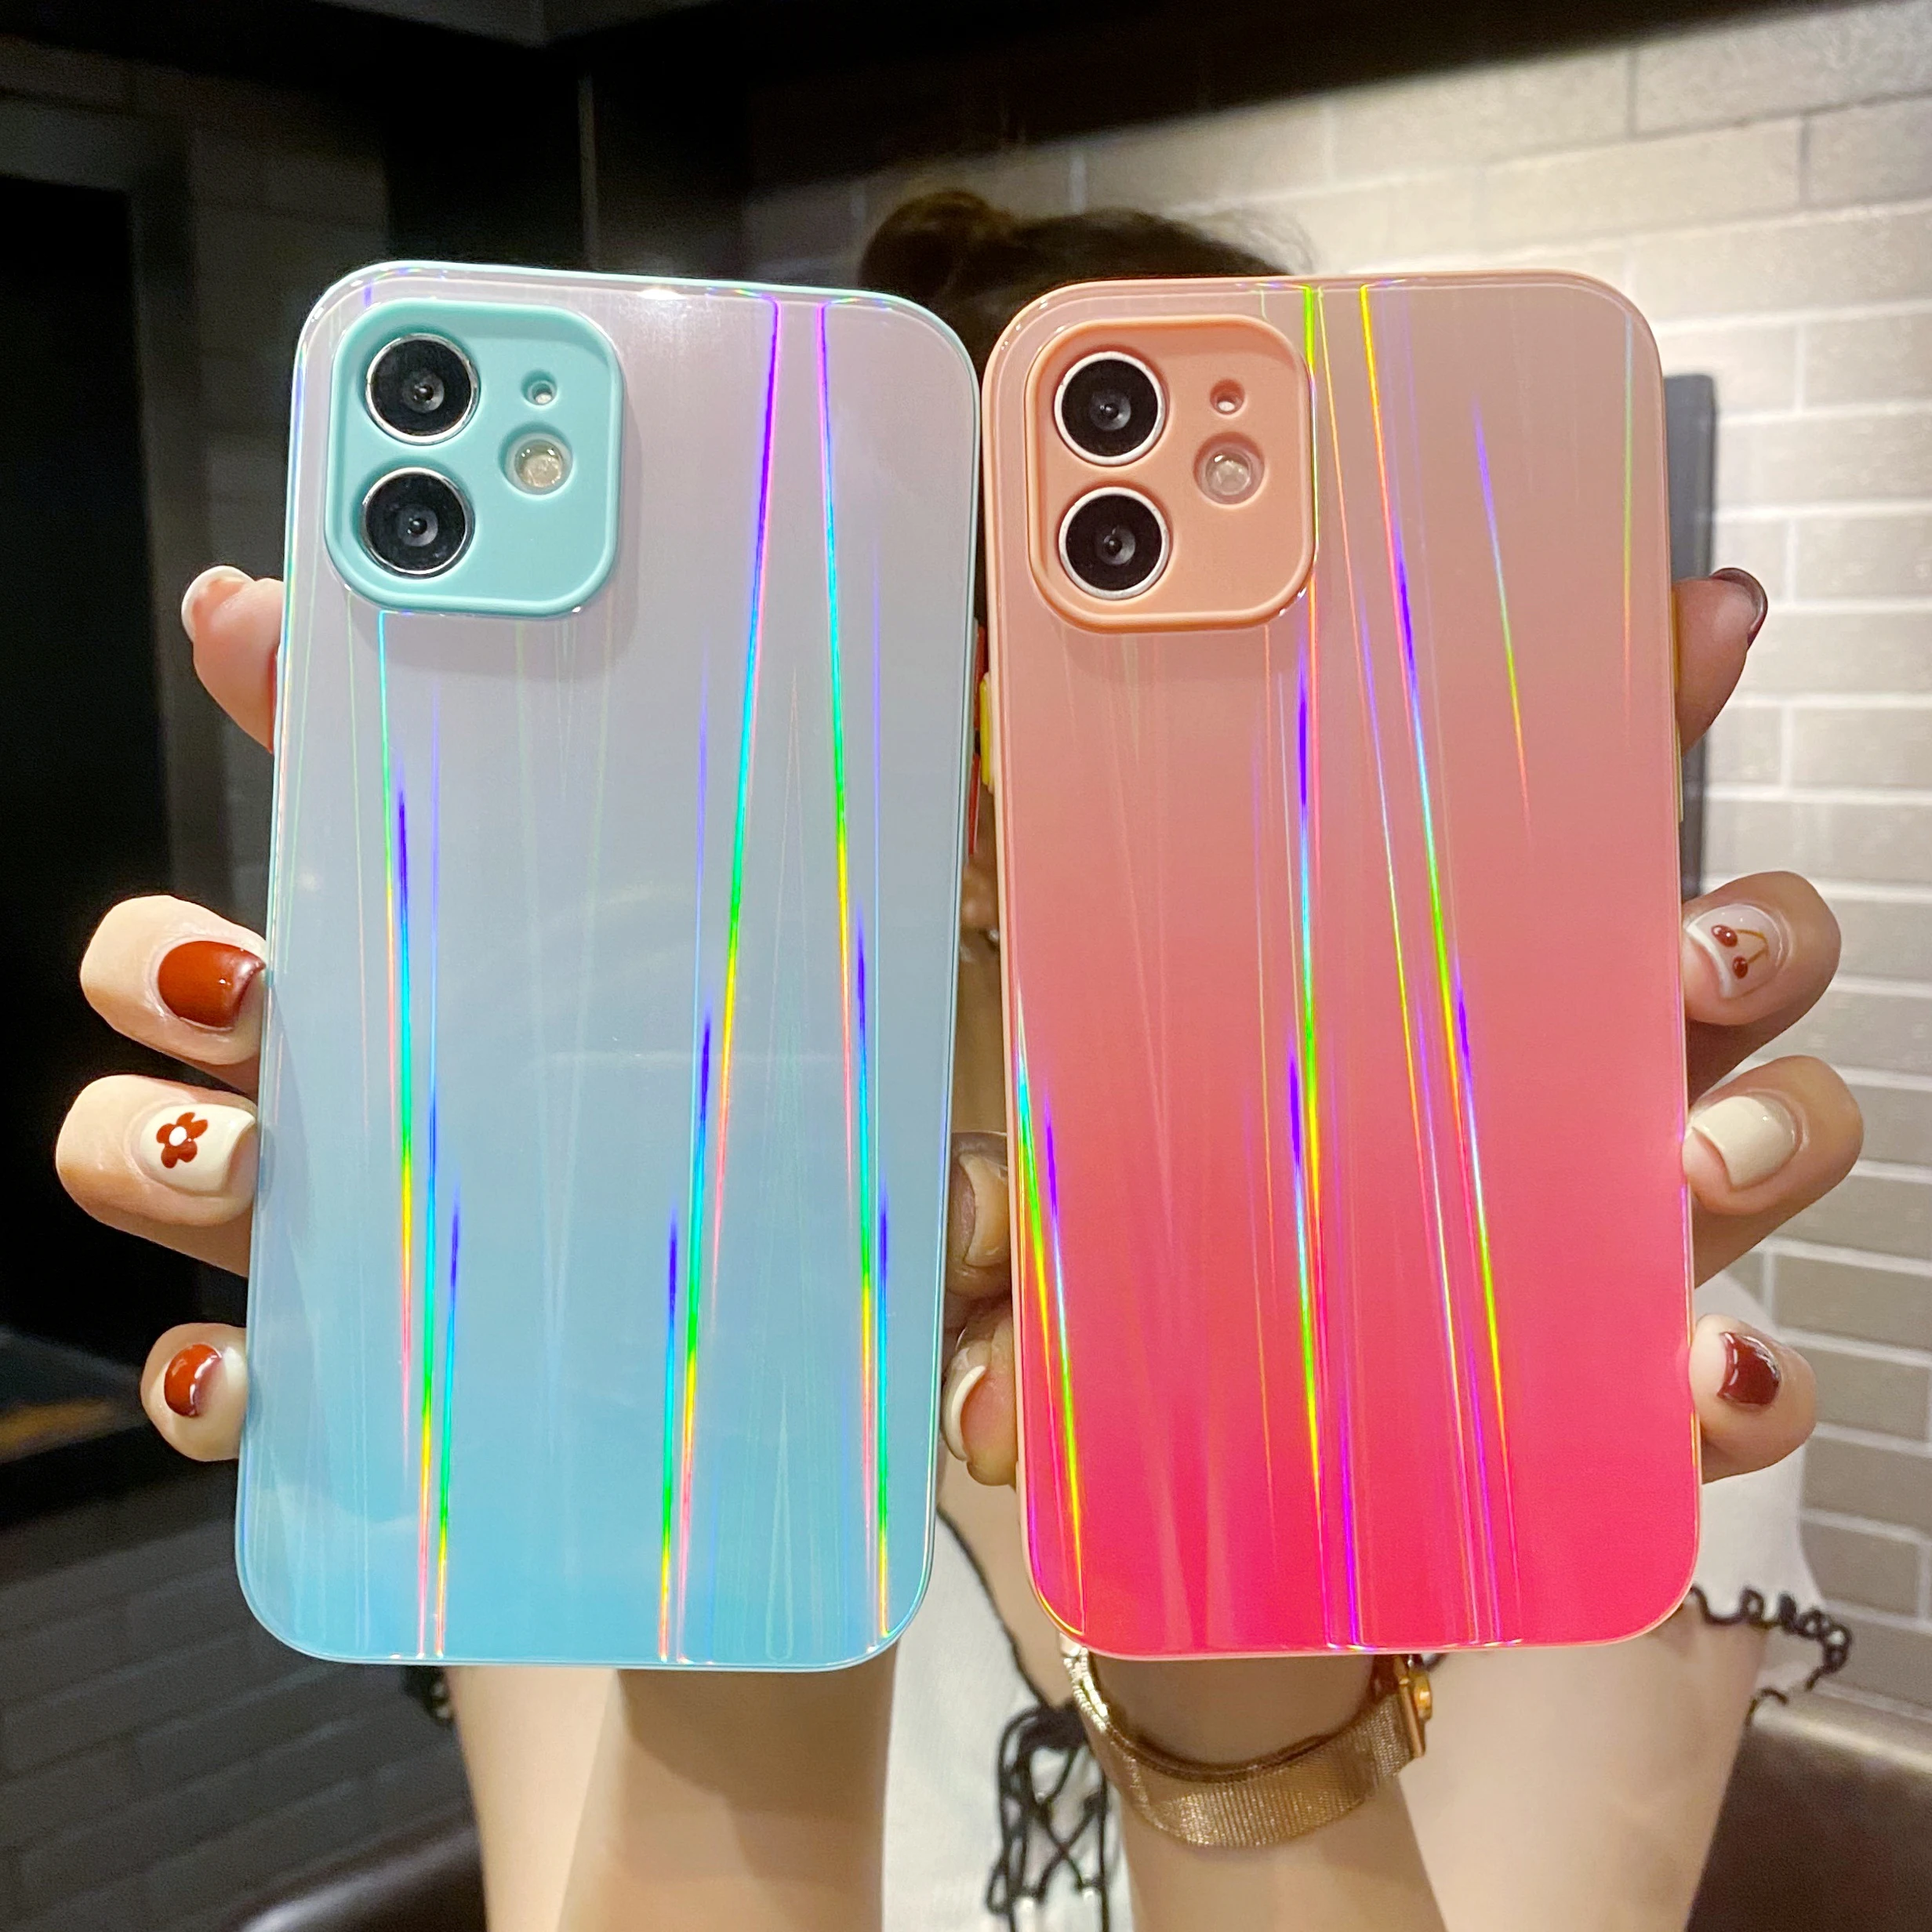 Anti-knock  Case For iphone 11 12 Luxury Soft Shockproof Aurora Case For iphone 7 8 Plus XS X Max XR Soft Cover Accessories